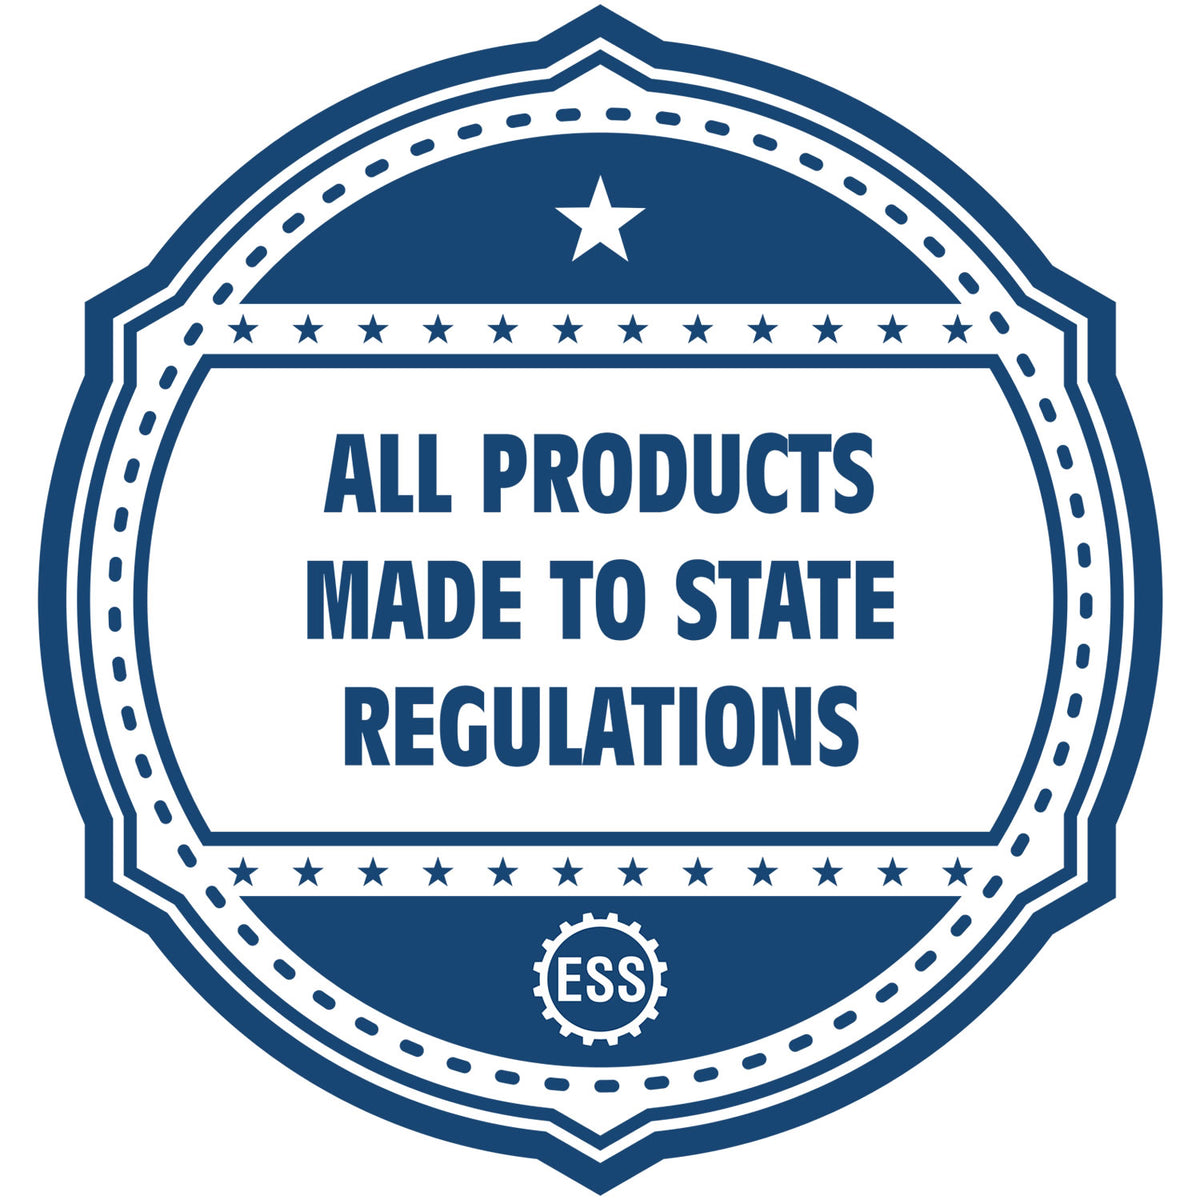 An icon or badge element for the Self-Inking Rectangular Rhode Island Notary Stamp showing that this product is made in compliance with state regulations.